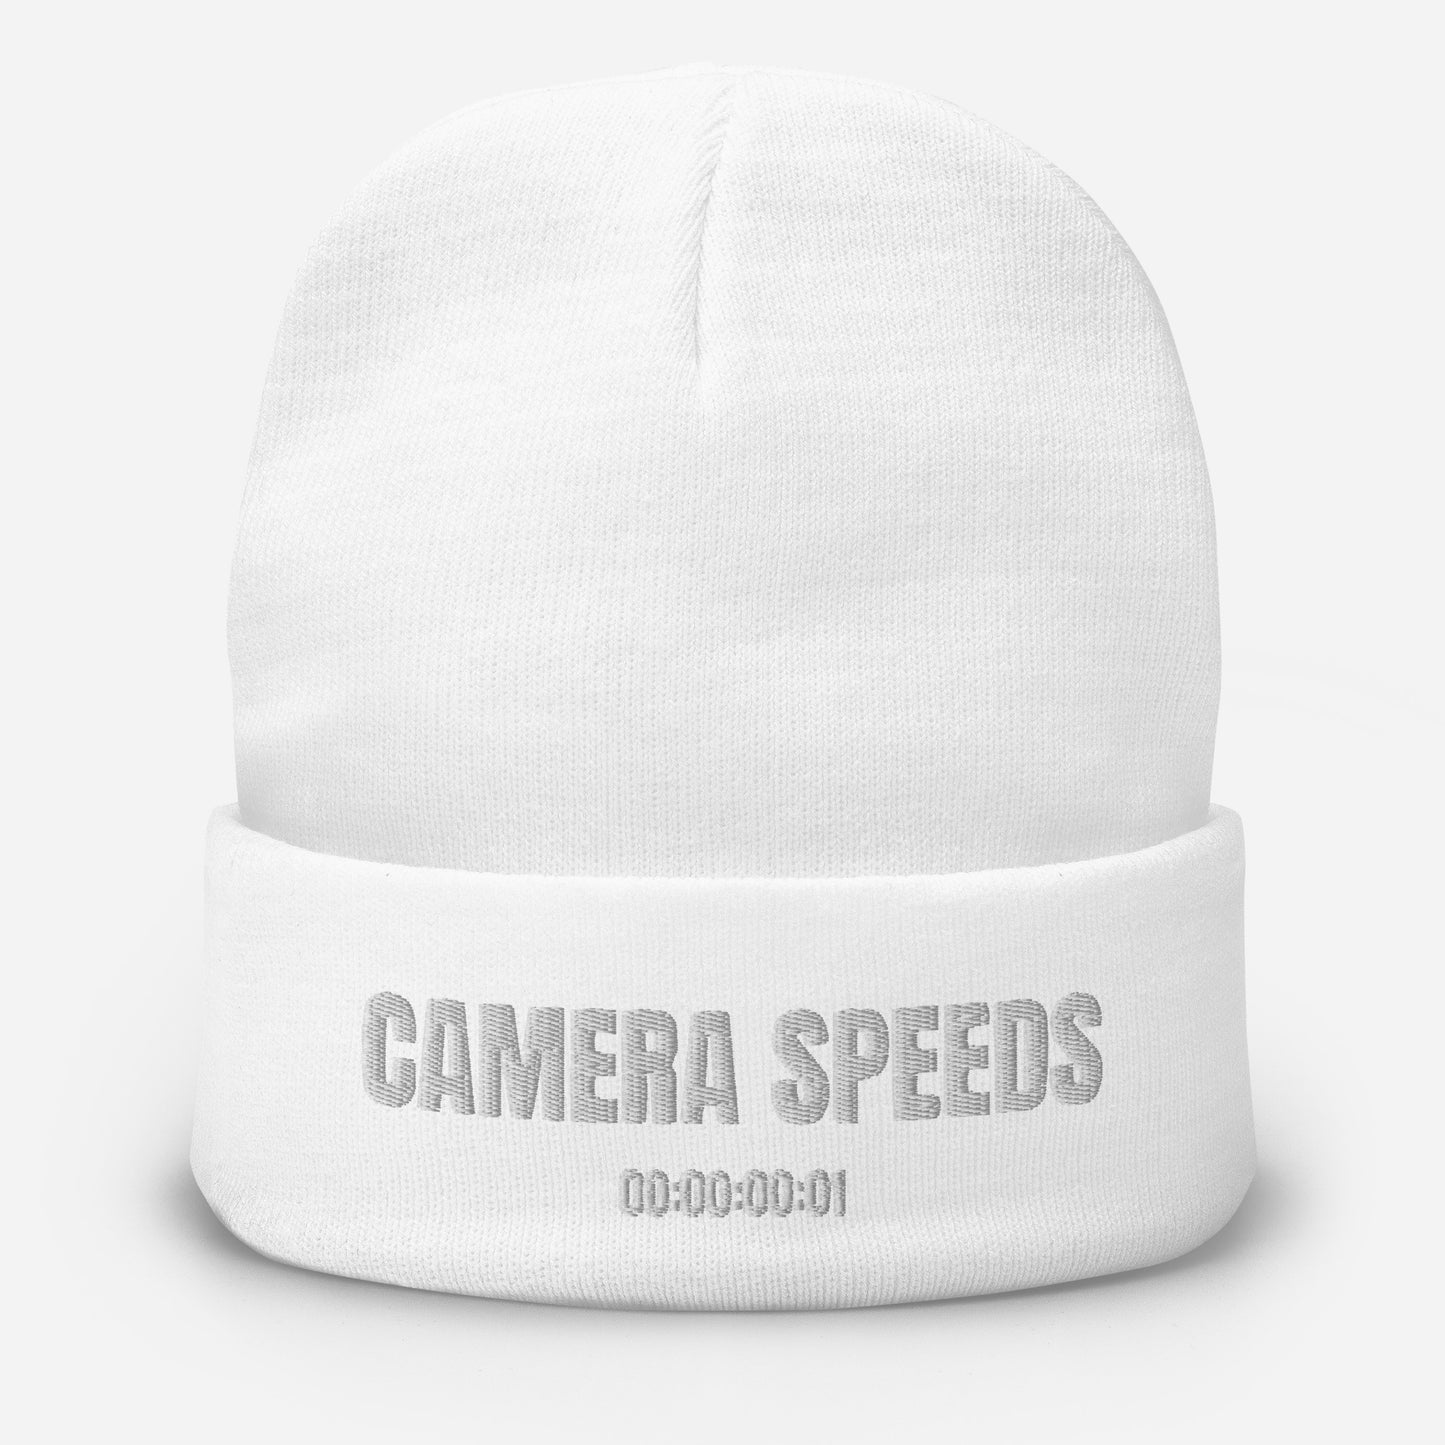 Camera Speeds Embroidered Beanie (Variant A)